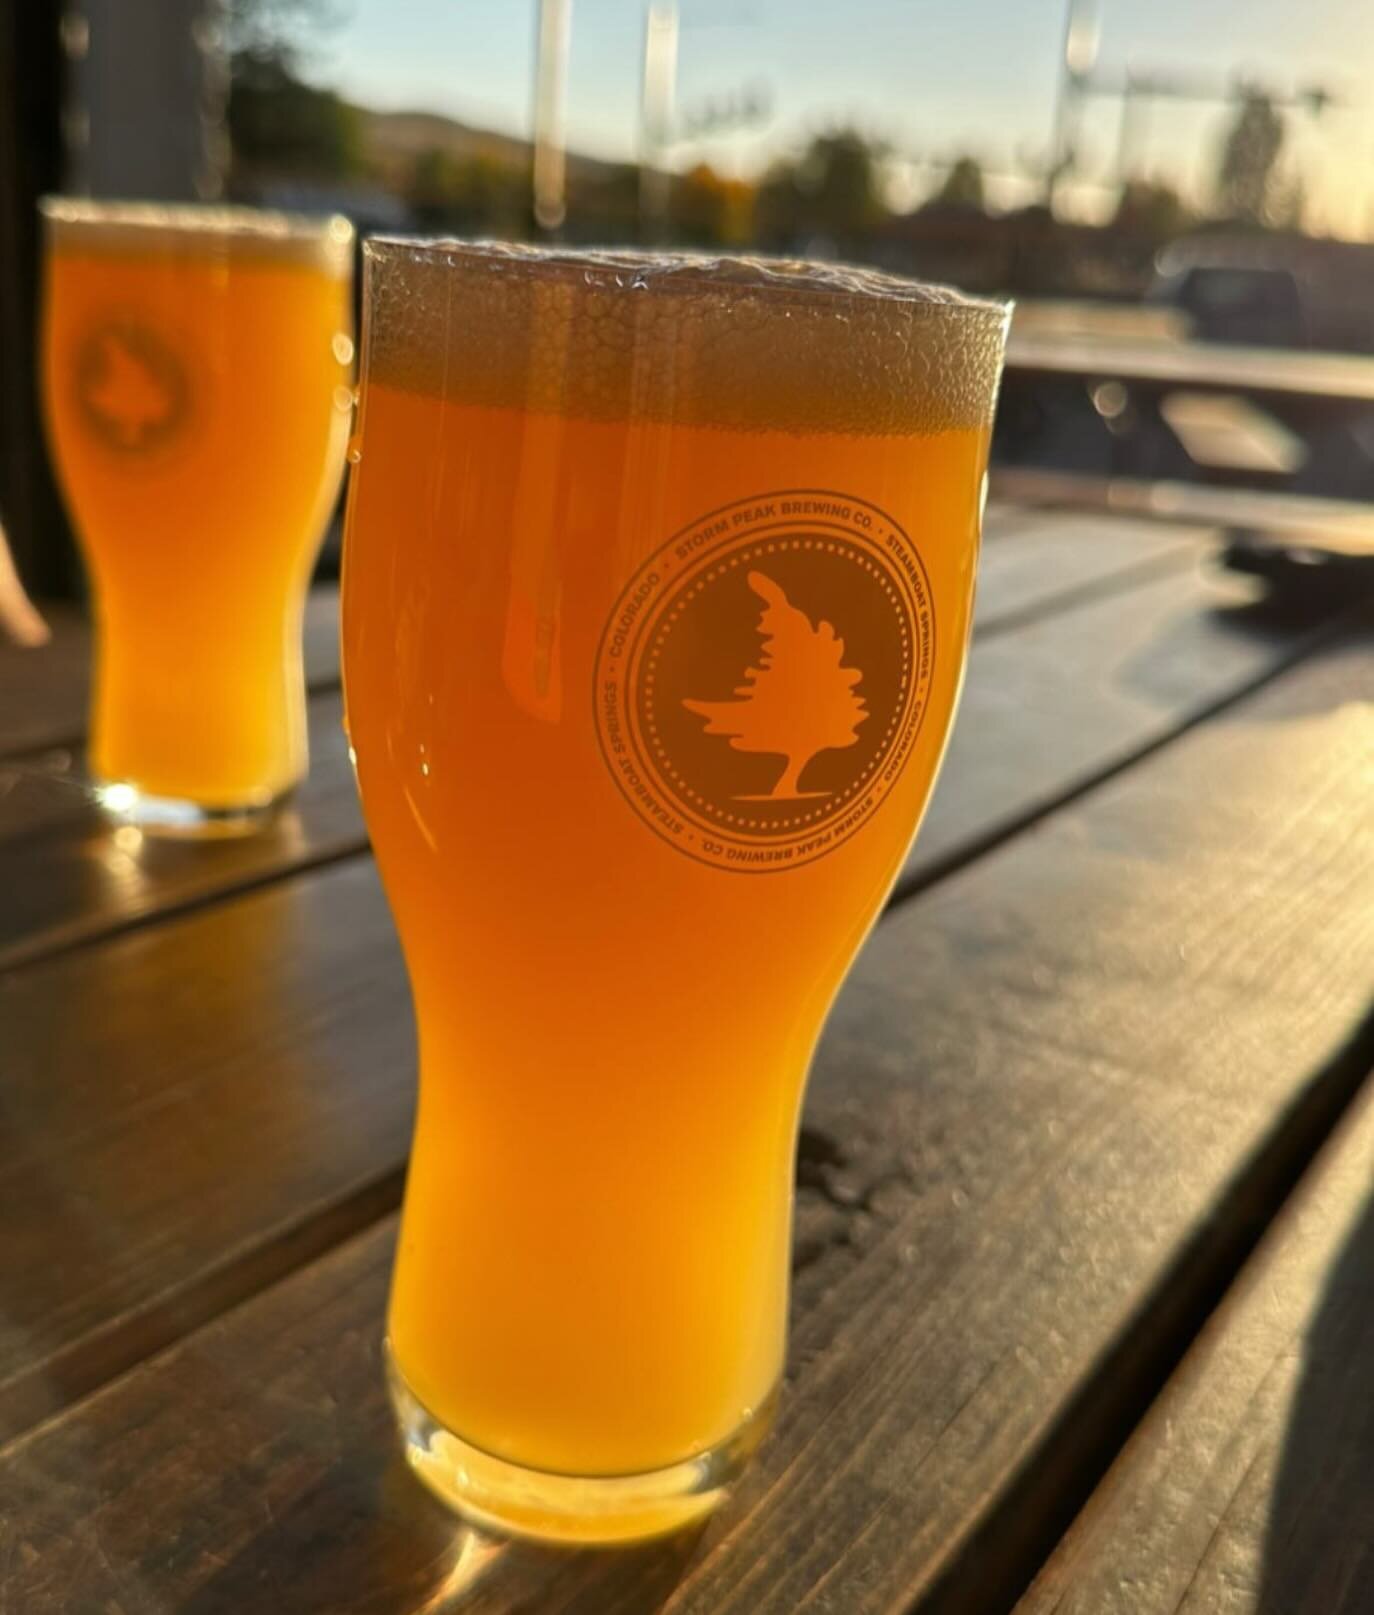 This fall weather is making us so happy. Perfect for sun drenched beers after taking in Steamboat&rsquo;s beauty. 🍂☀️🍻

📸: @rachelfortman 

#stormpeakbrewing #steamboatsprings #colorado #craftbeer #fall #sun #getoutside #drinkswithfriends